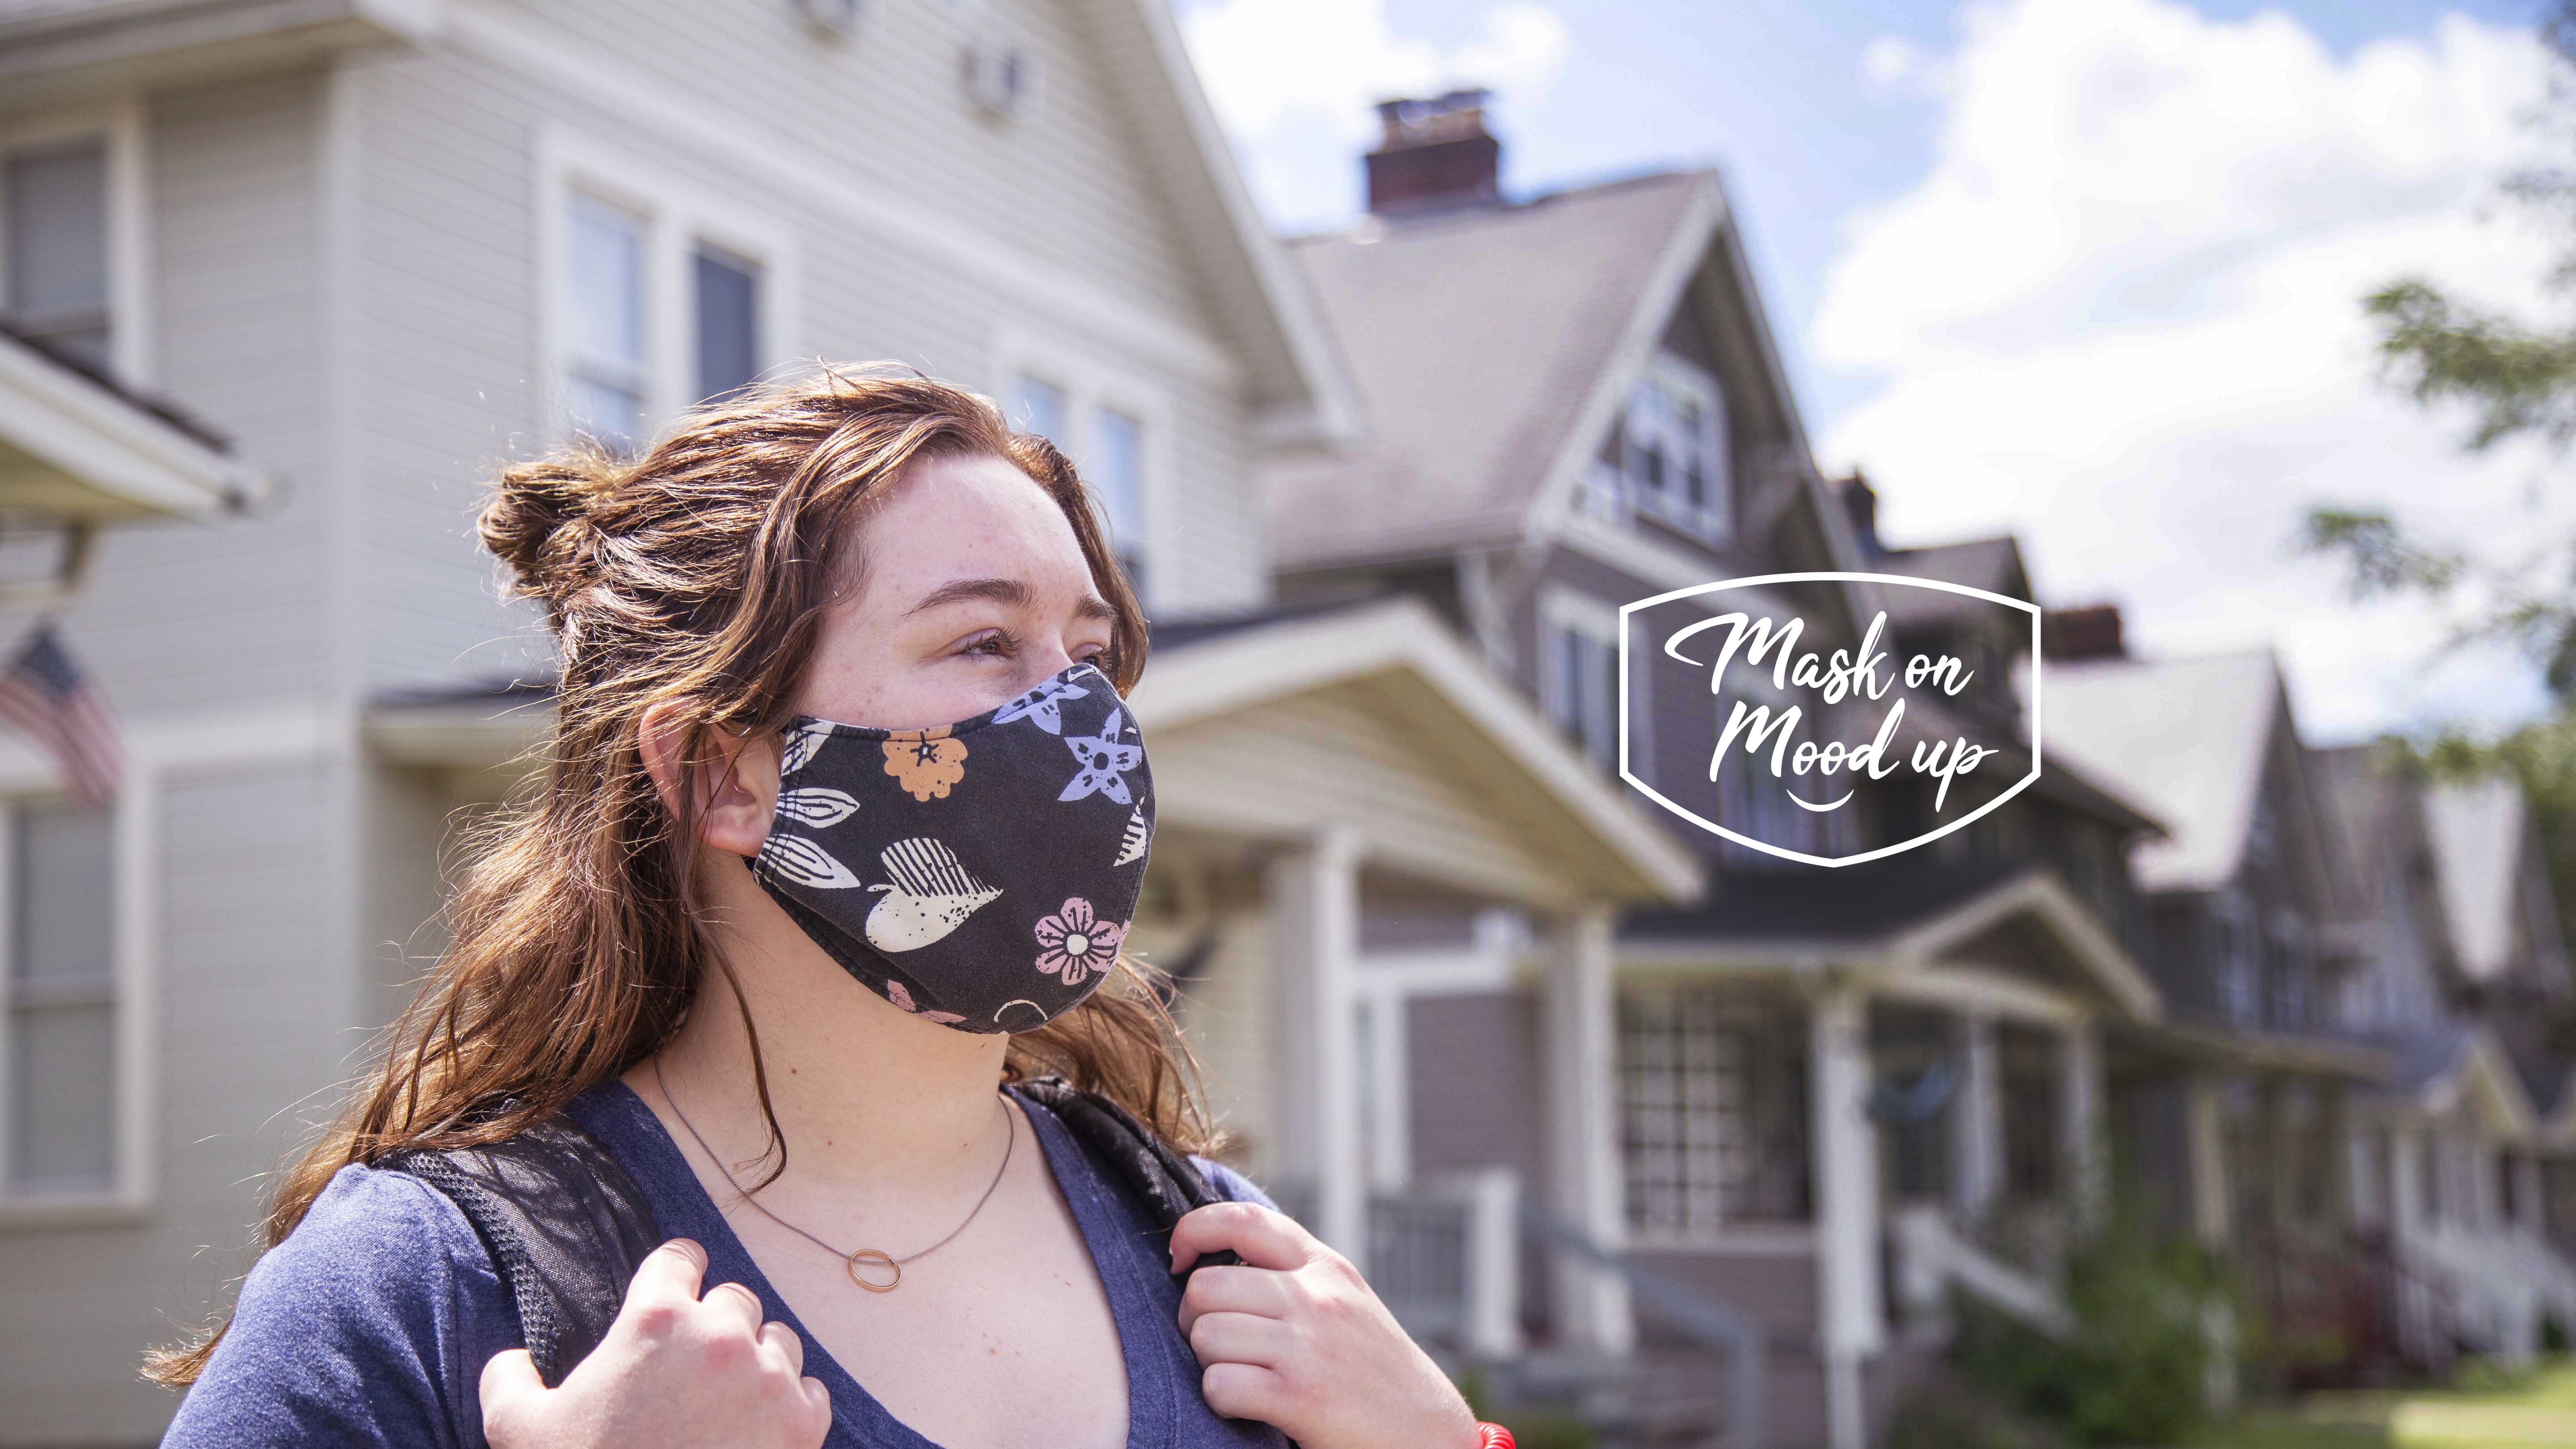 female student wearing backpack and mask in front of houses